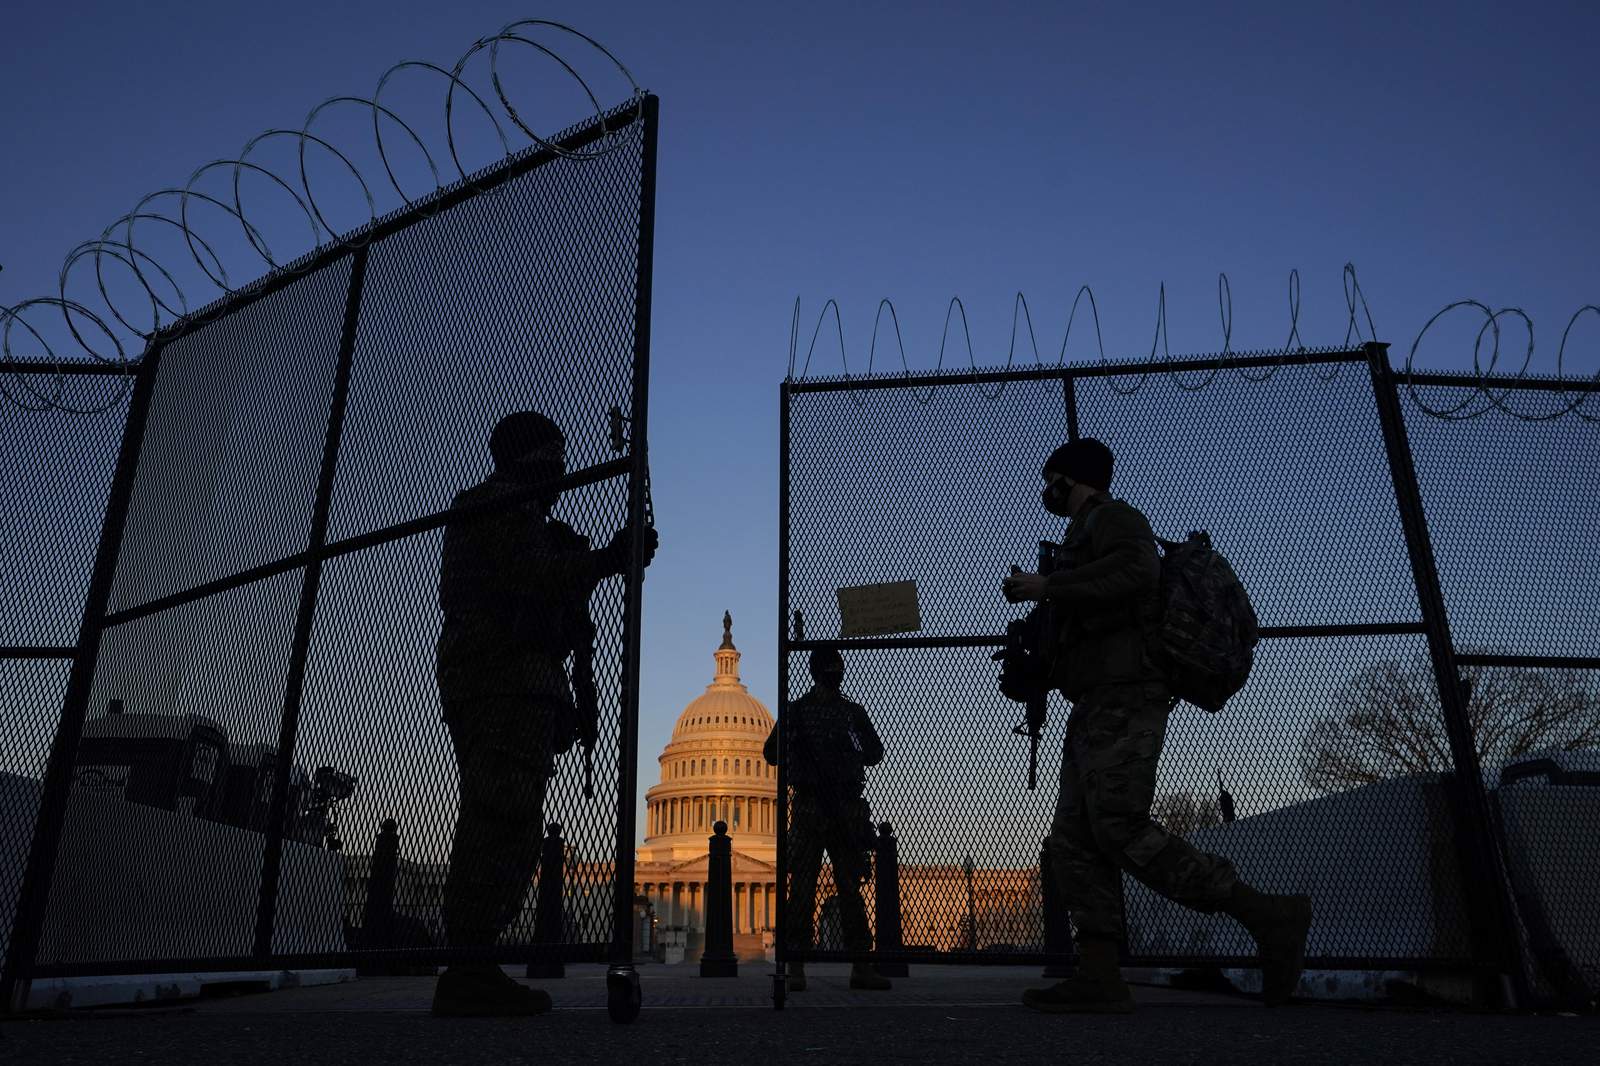 Security officials to scale back fencing around US Capitol